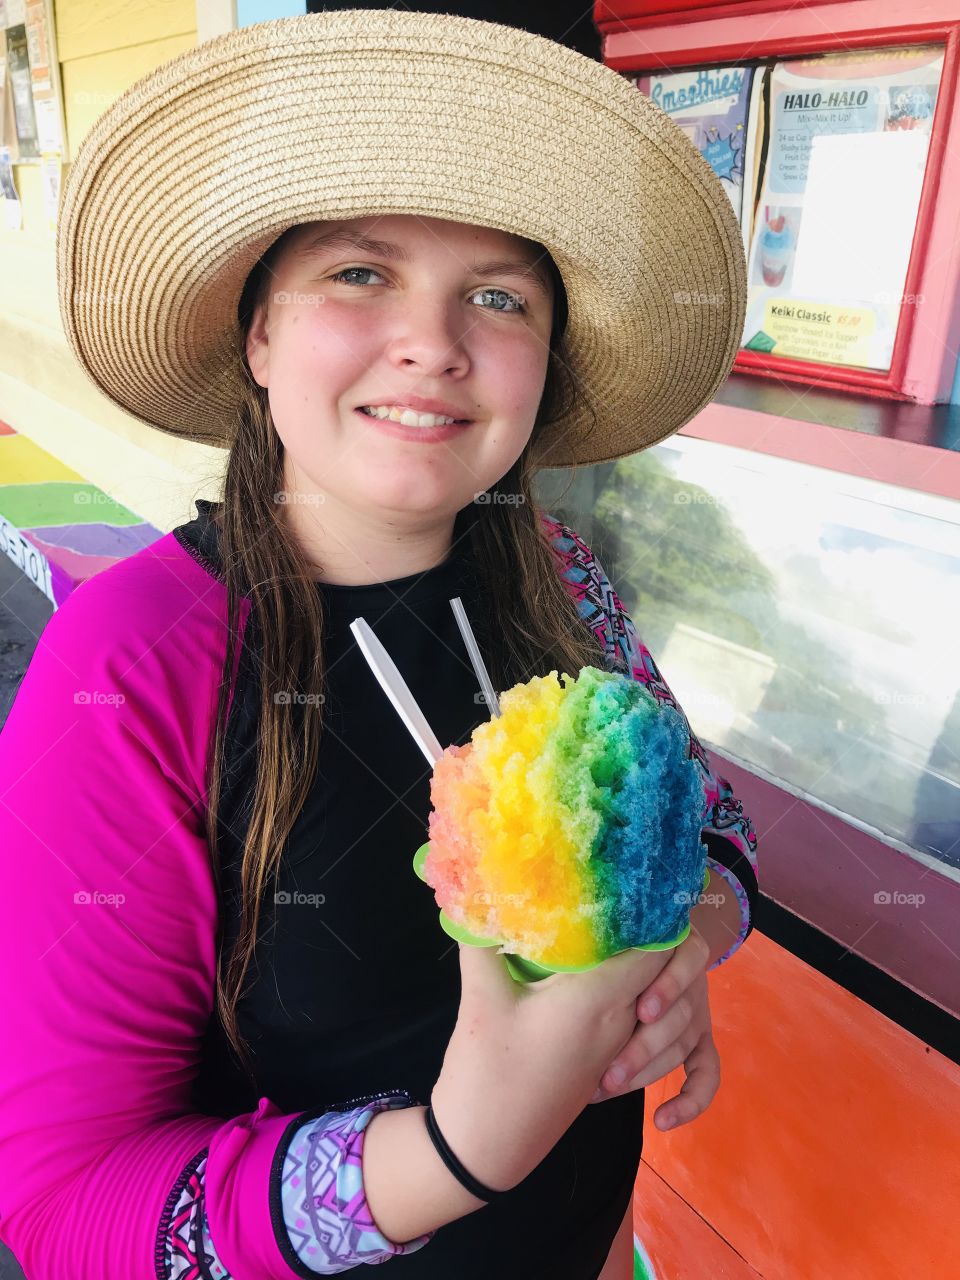 Darling girl in Hawaii with her traditional icy cold Hawaiian Ice drink complete with multi colored flavors!  